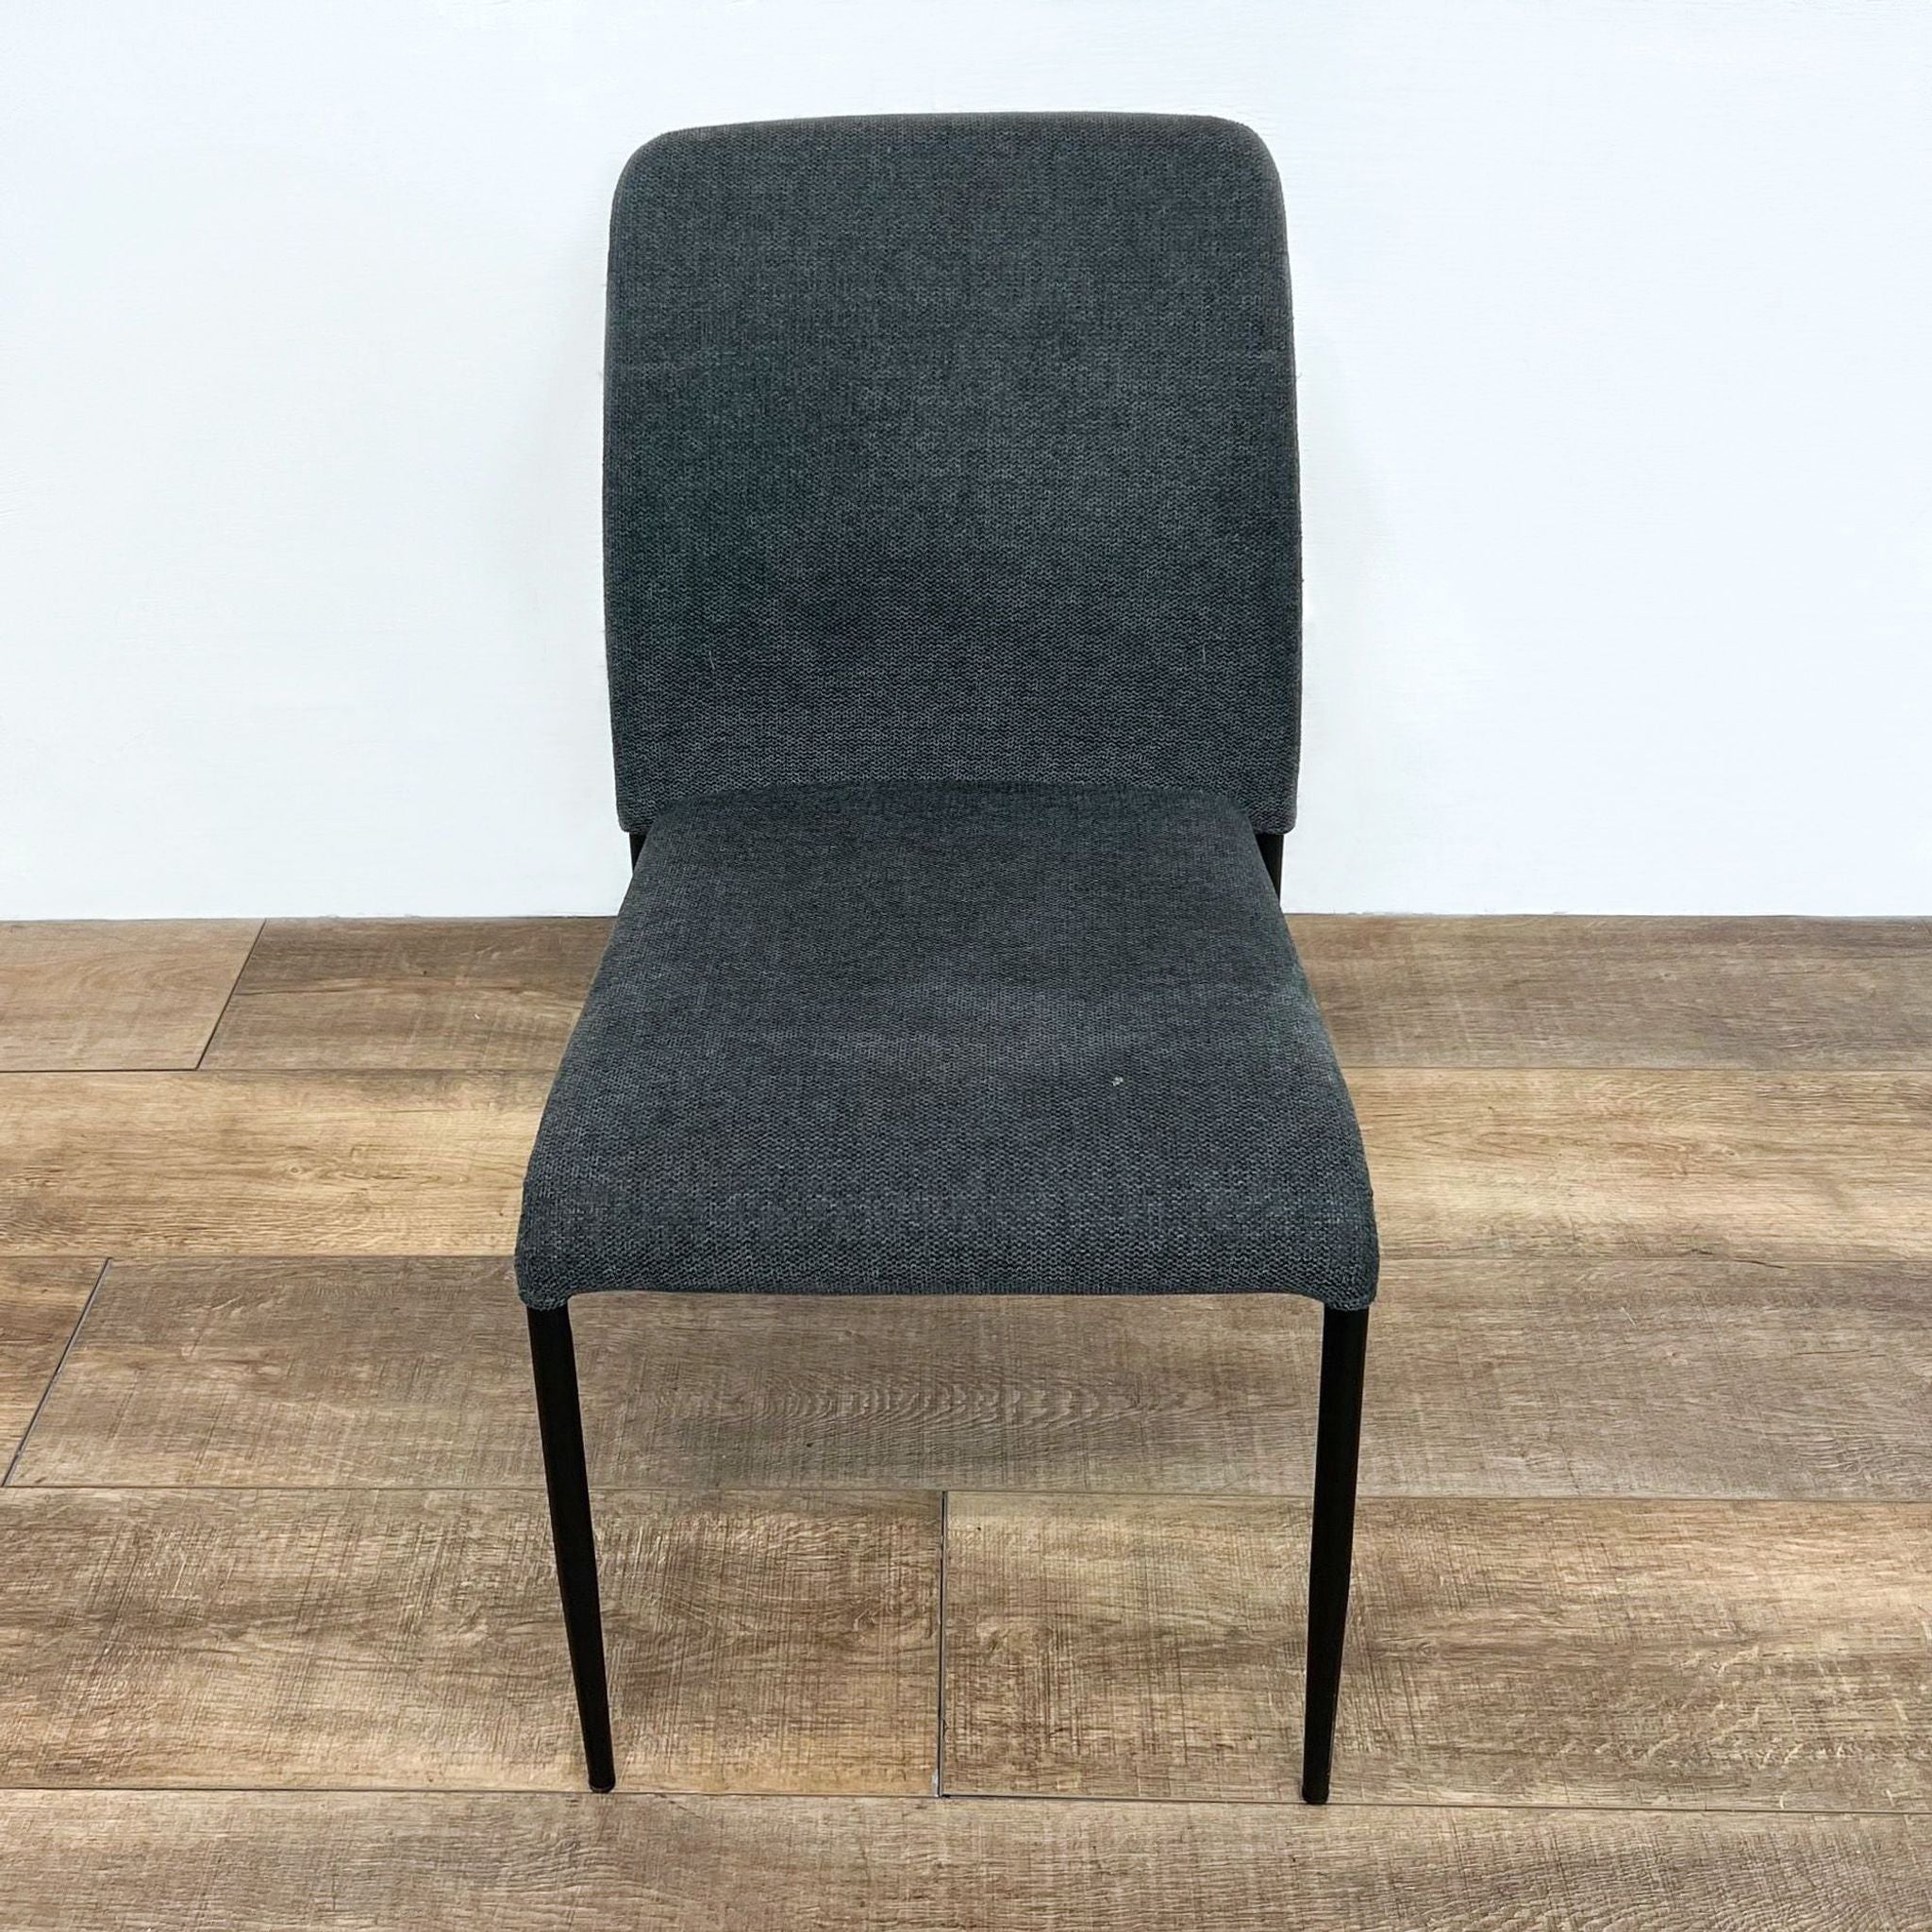 Reperch brand dining chair with dark upholstered seat and back on tapered legs, displayed on wooden floor.